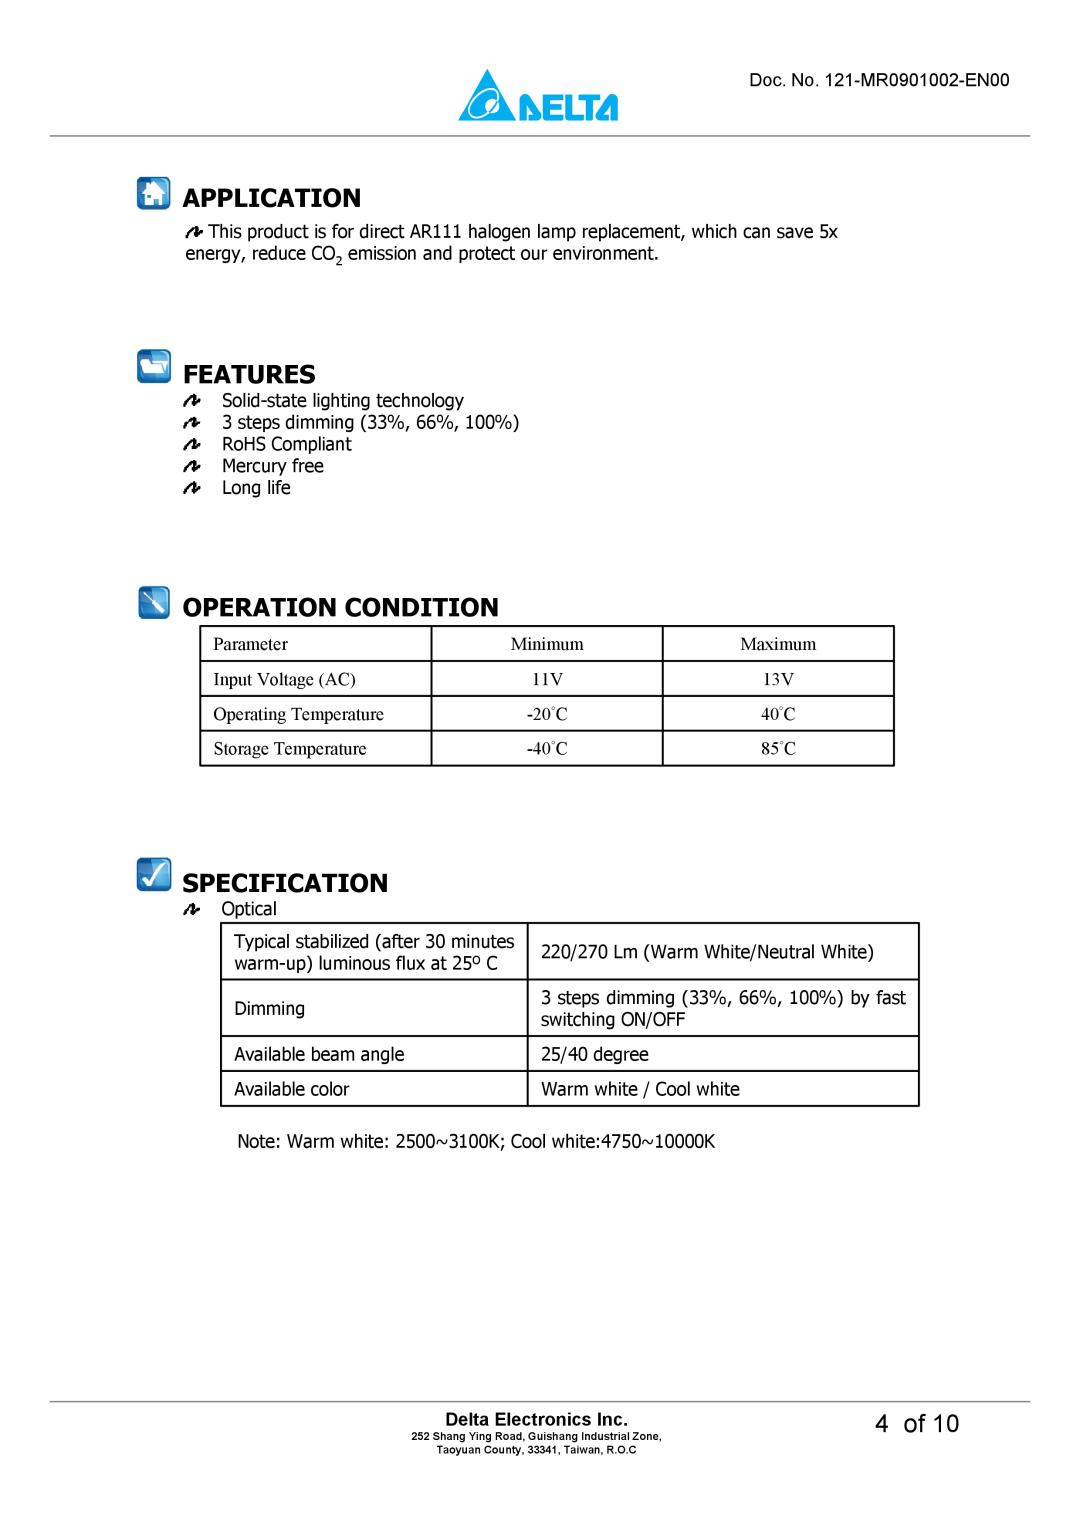 Delta Electronics MADT-09LD manual Application, Features, Operation Condition, Specification, 4 of, Delta Electronics Inc 